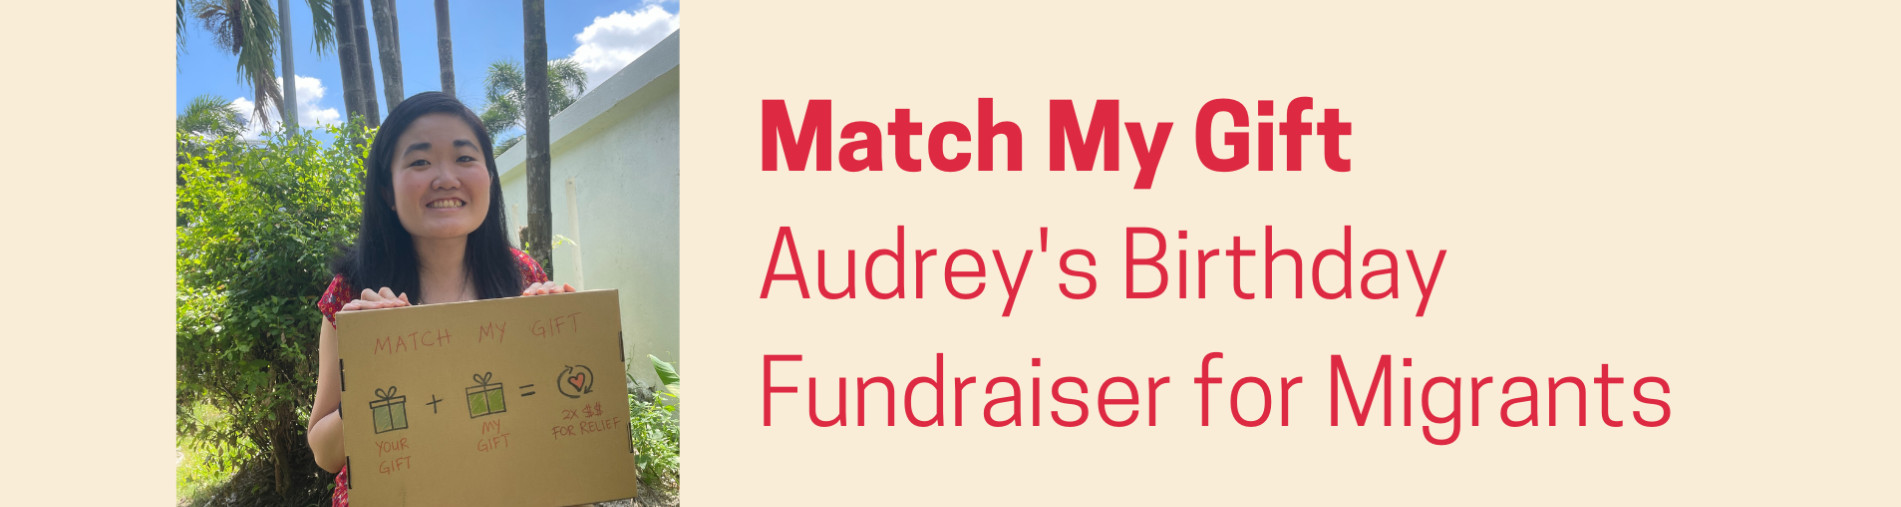 Match My Gift: Audrey's Birthday Fundraiser for Migrants